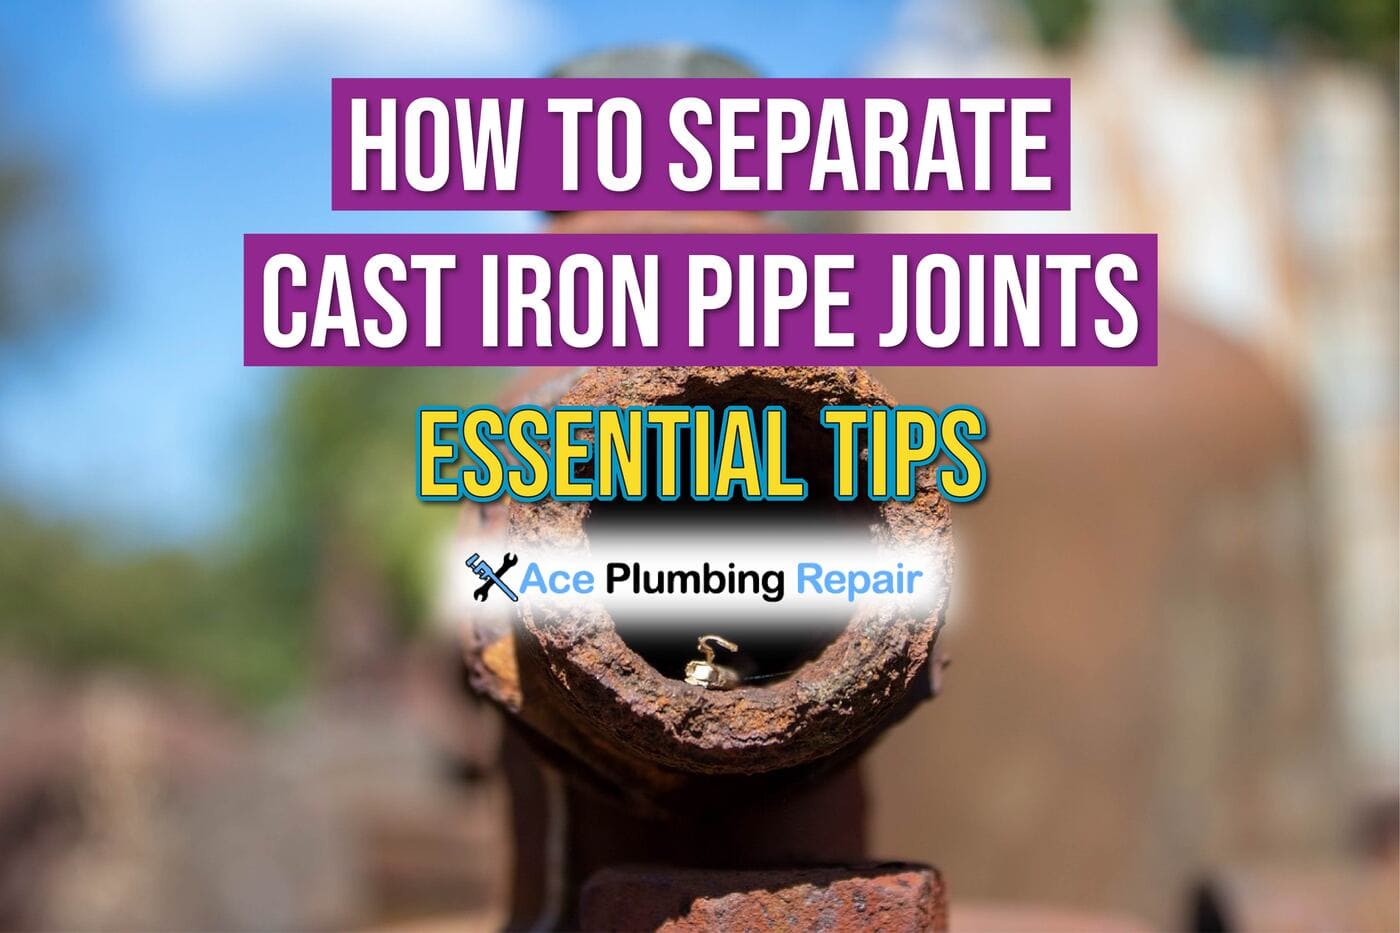 How to separate cast iron pipe joints